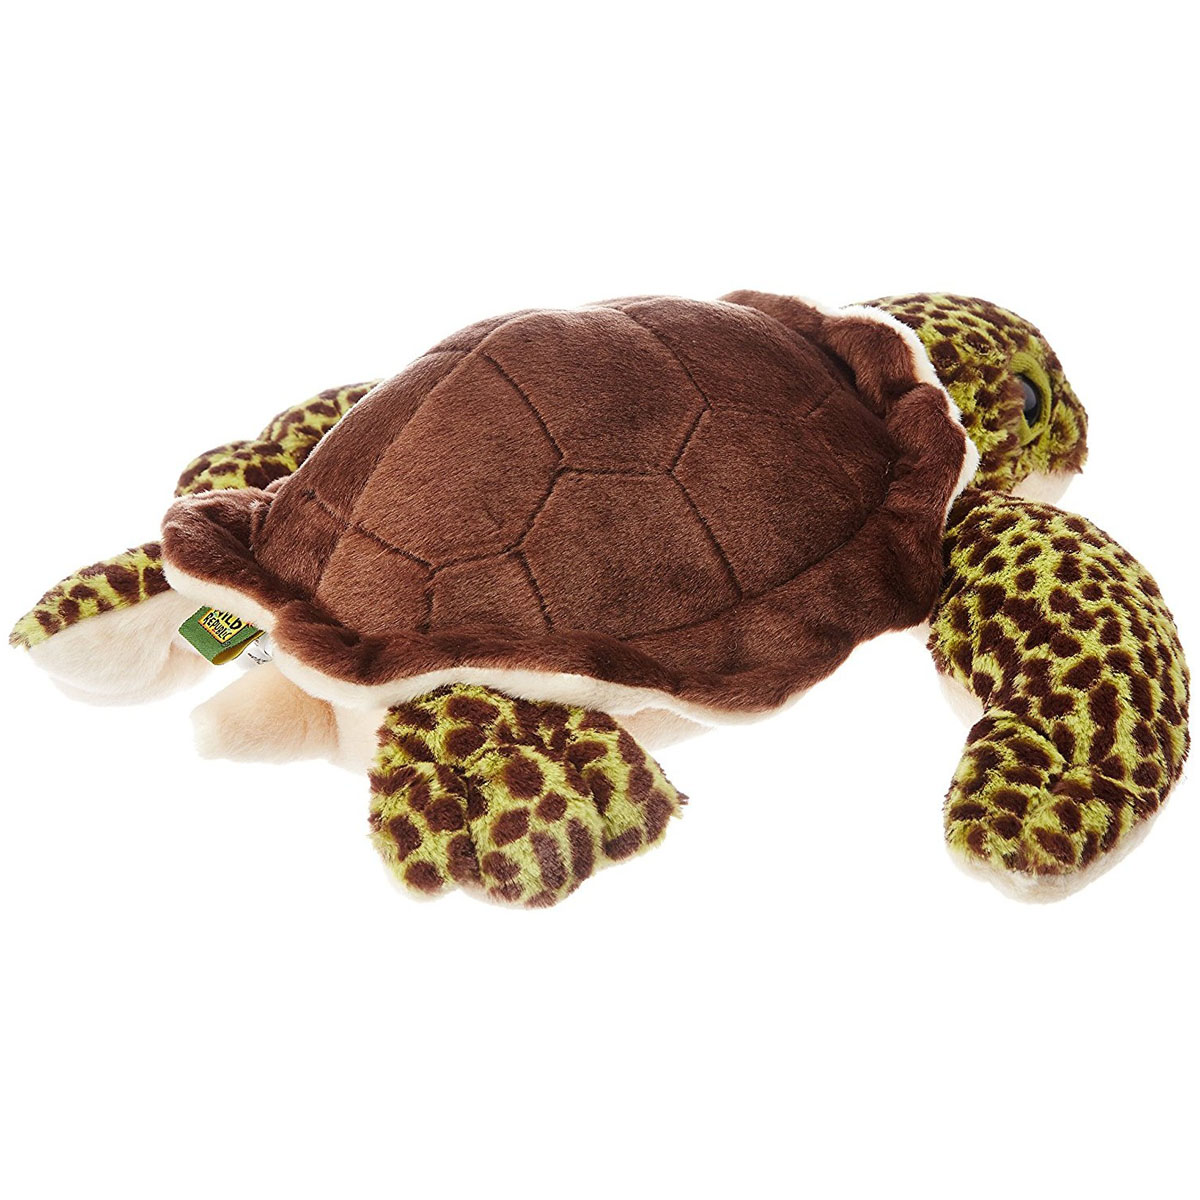 Wild Republic Turtle Soft Toy for Kids- 12 Inches